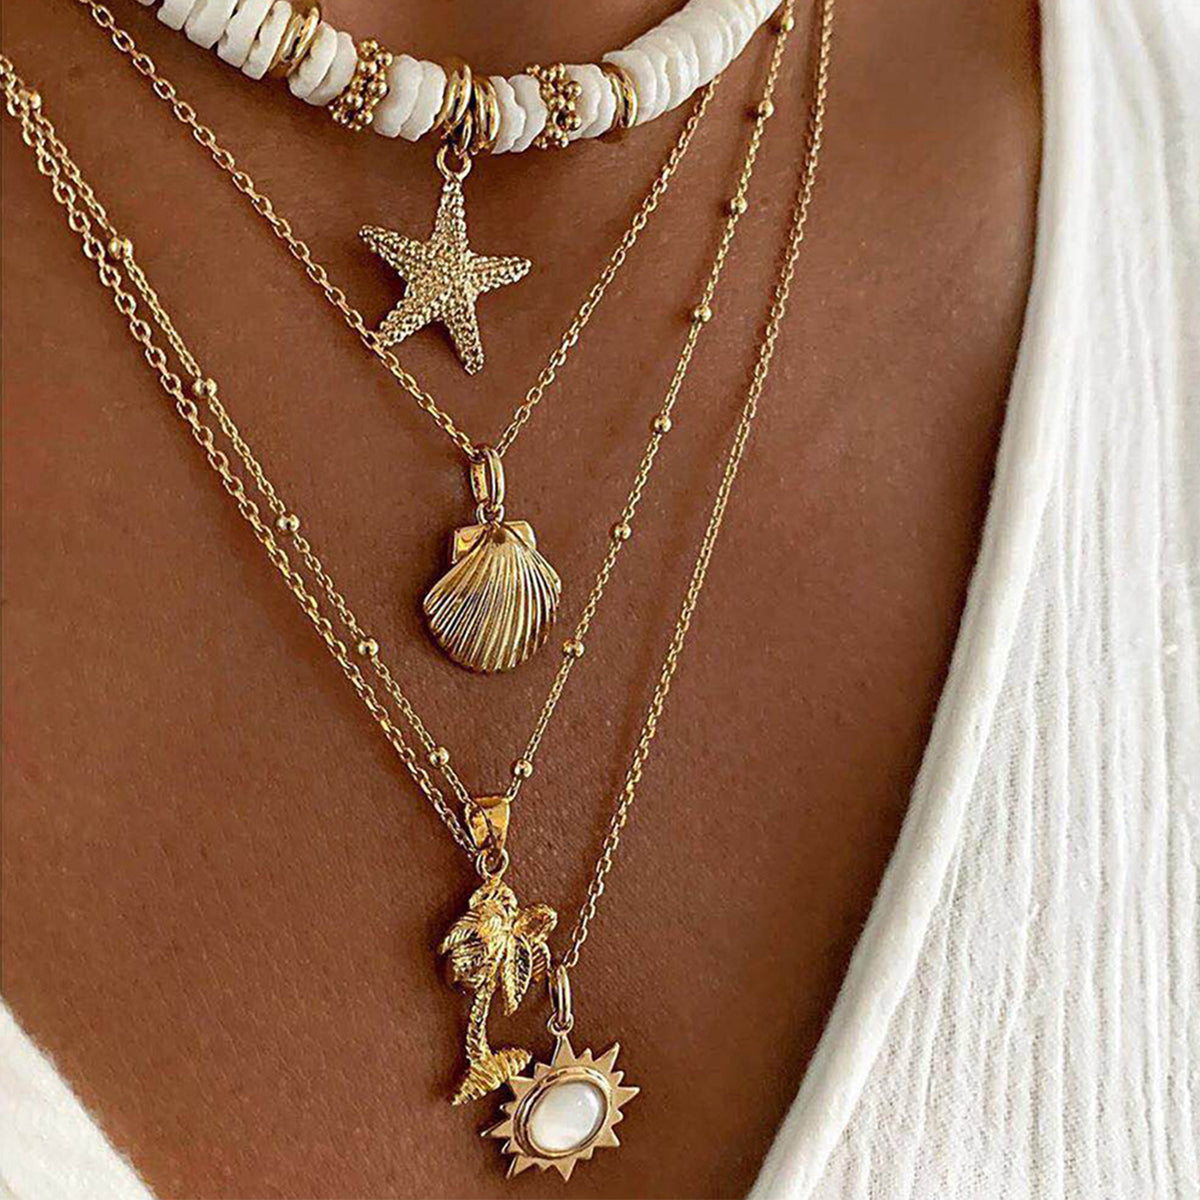 Star Shell Layered Charm Necklace